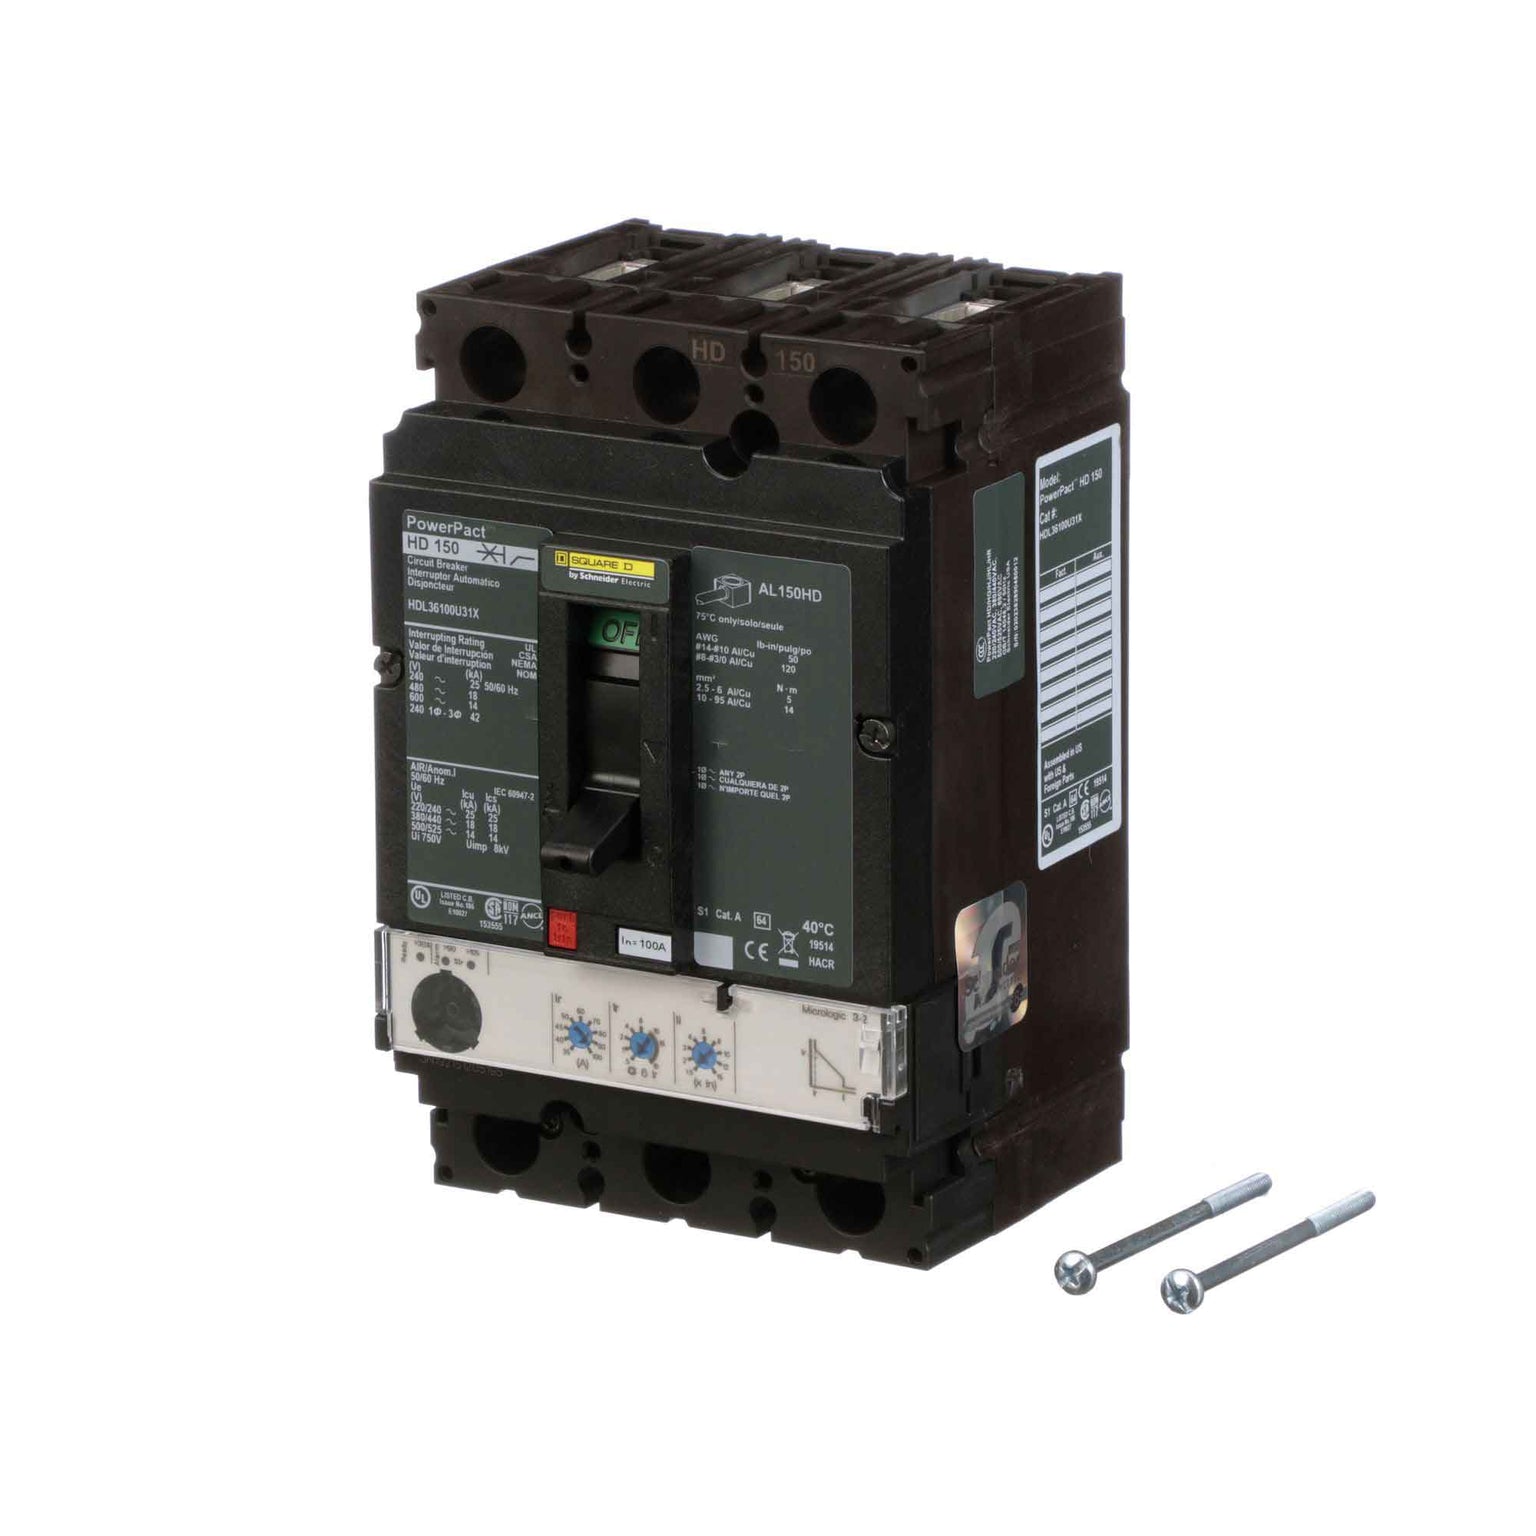 HDL36100U31X - Square D - Molded Case Circuit Breakers